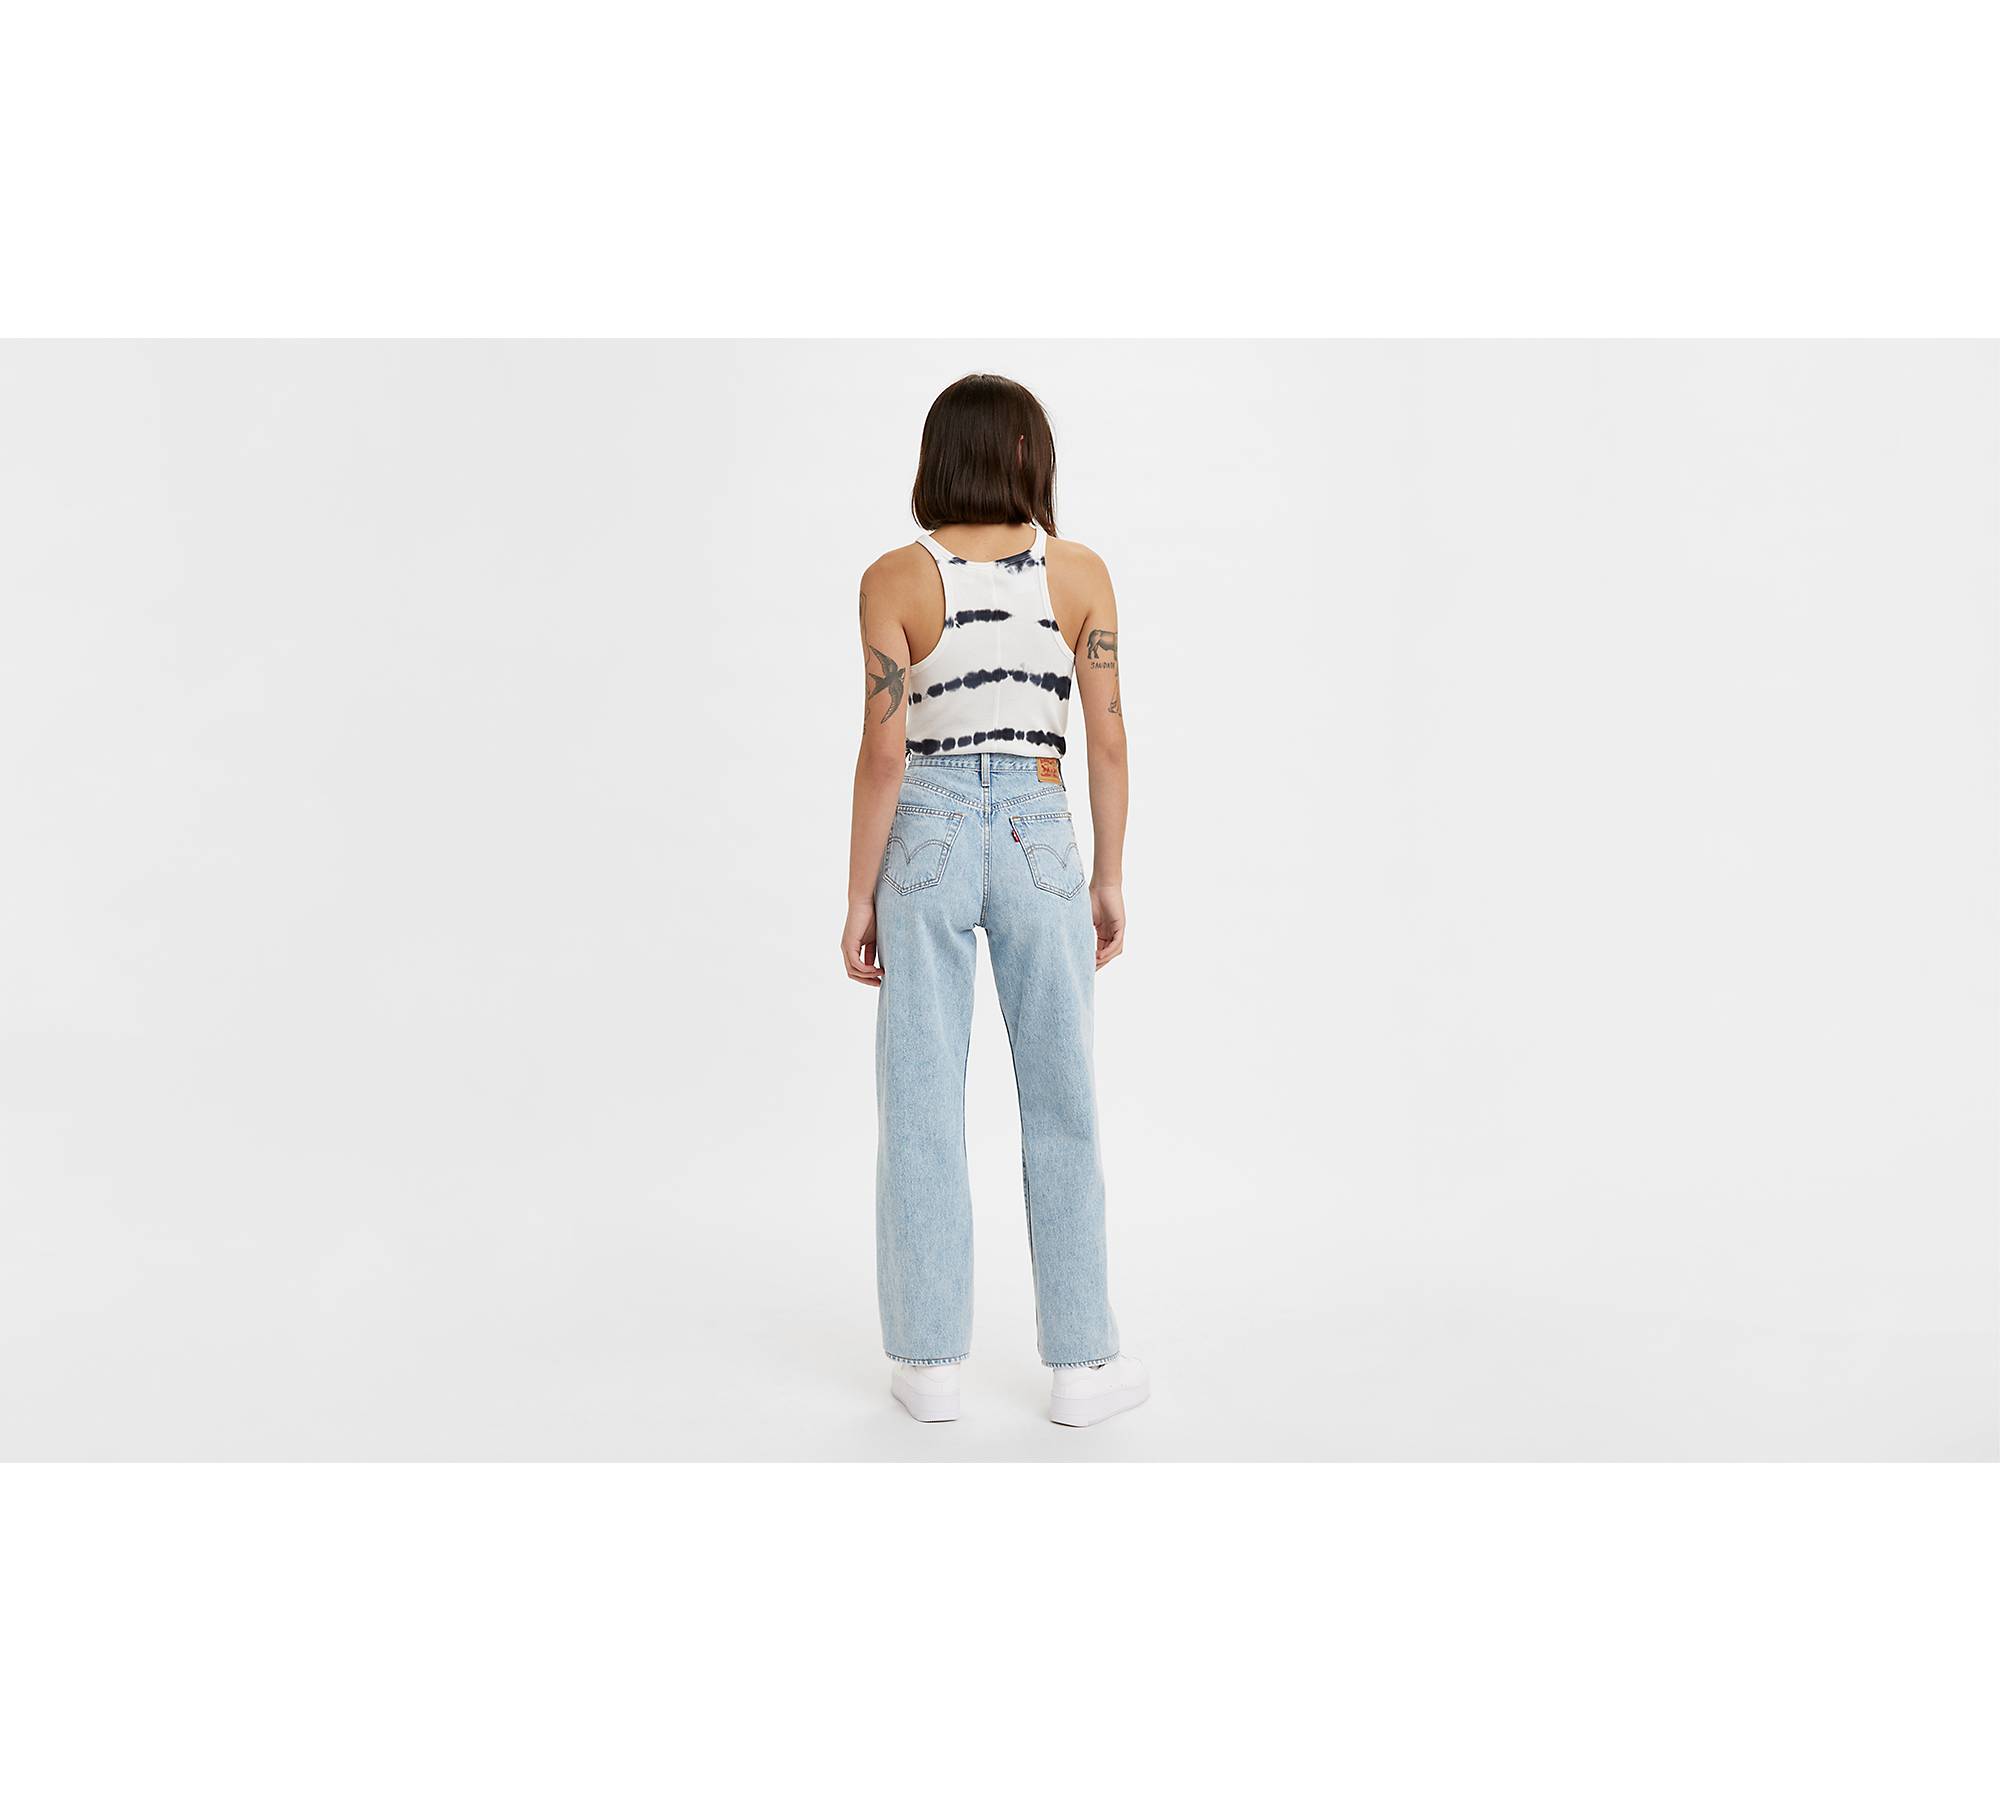 High Waisted Taper Women's Jeans - Light Wash